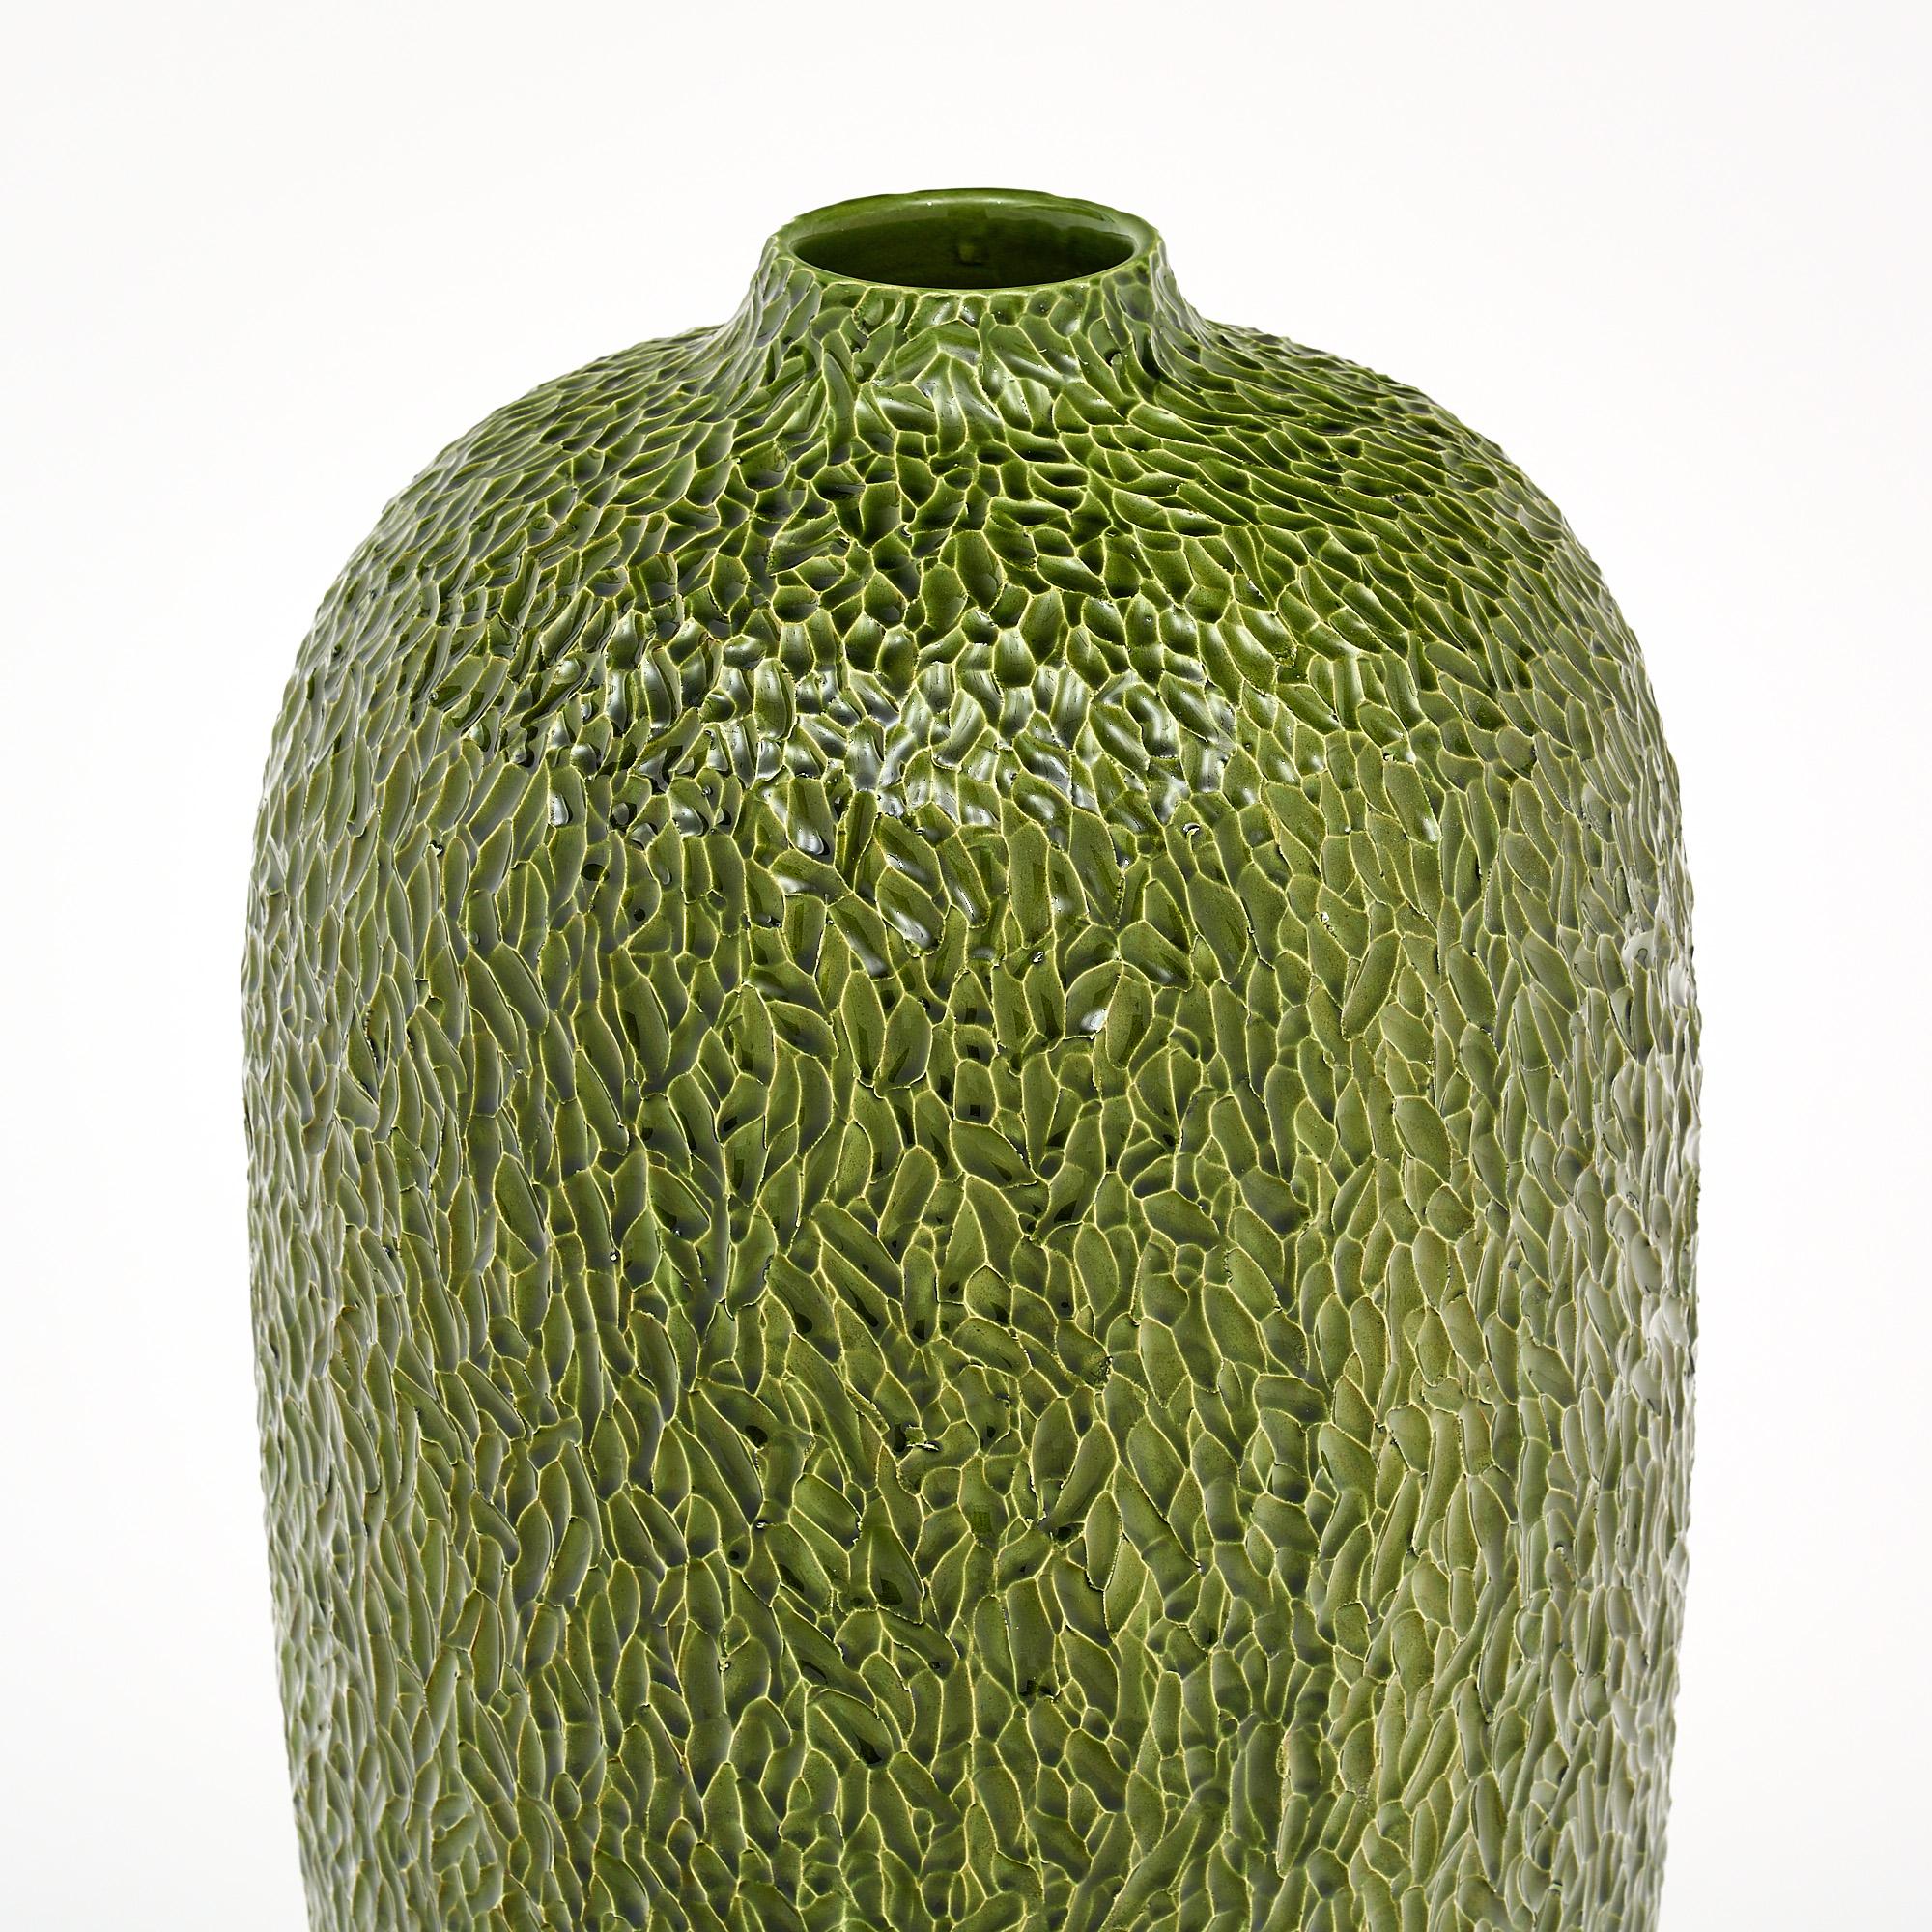 Vase, Italian, made of glazed ceramic and featuring a delicate leaf pattern imprint. This hand-crafted piece has an excellent impact.
